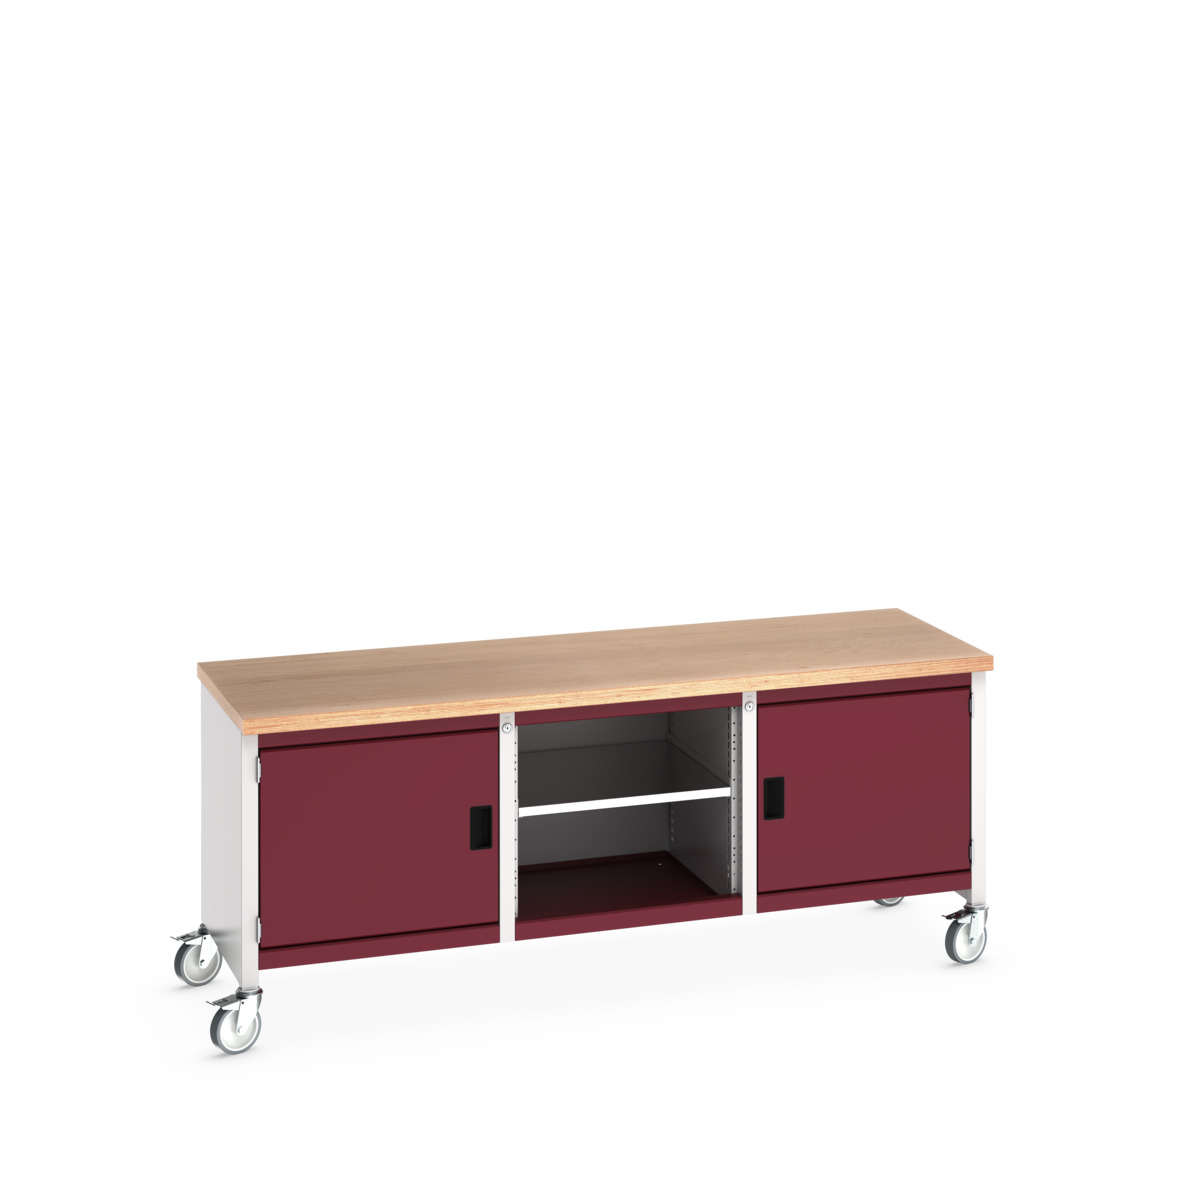 41002118.24V - cubio mobile storage bench (mpx)